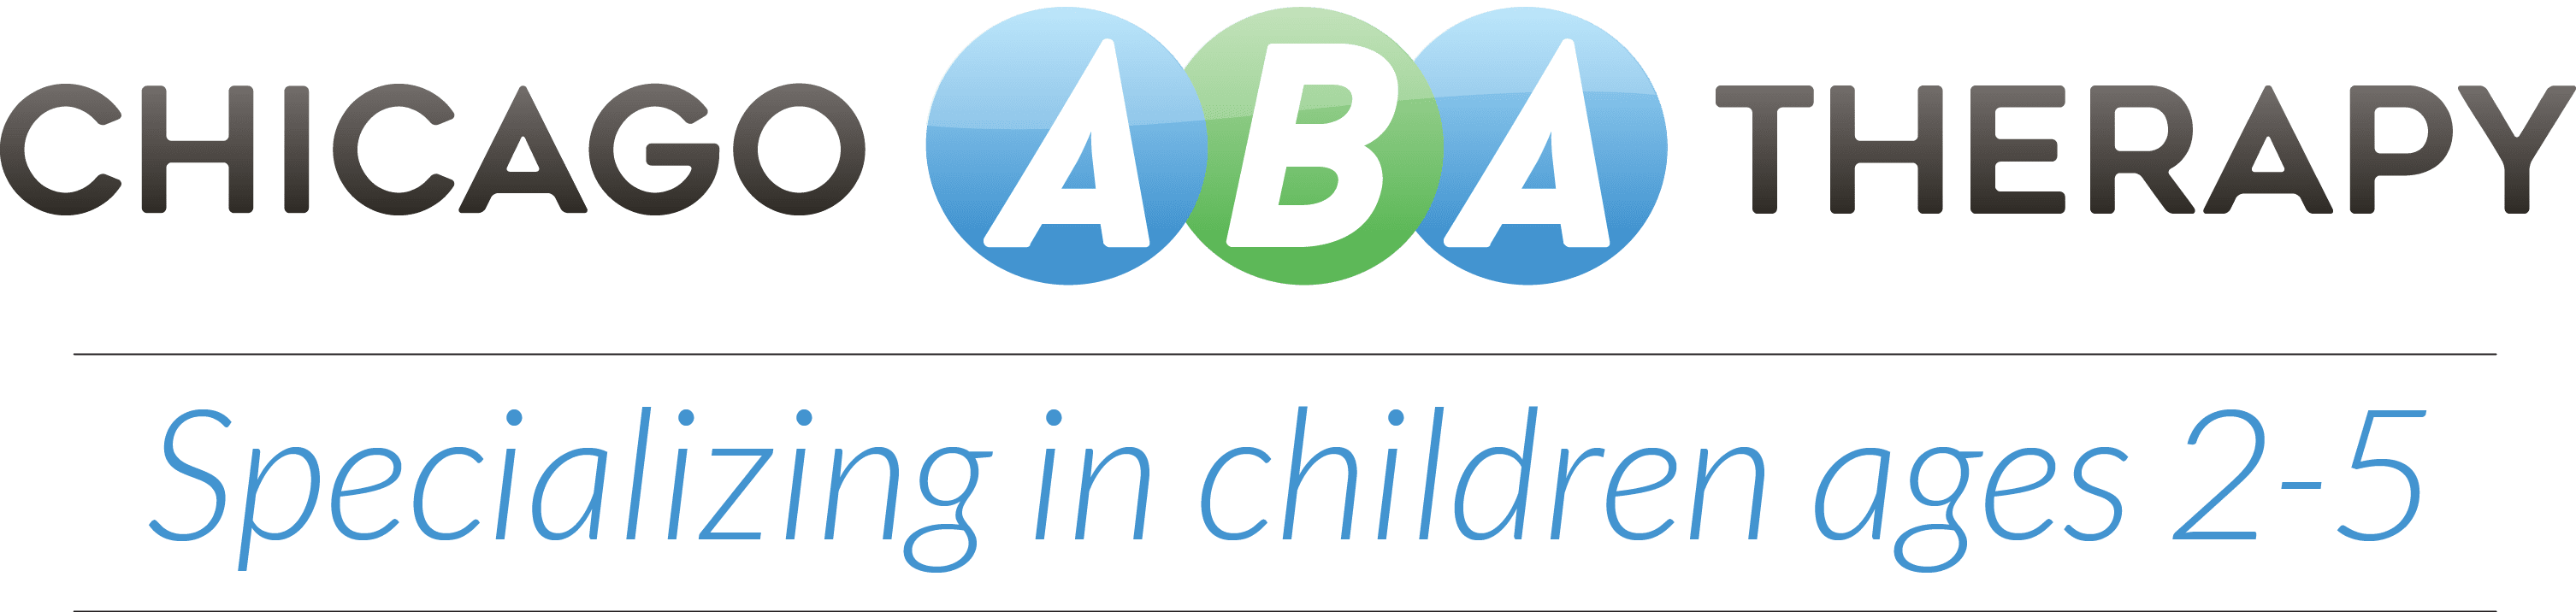 Chicago ABA Therapy - Founded By Karen George